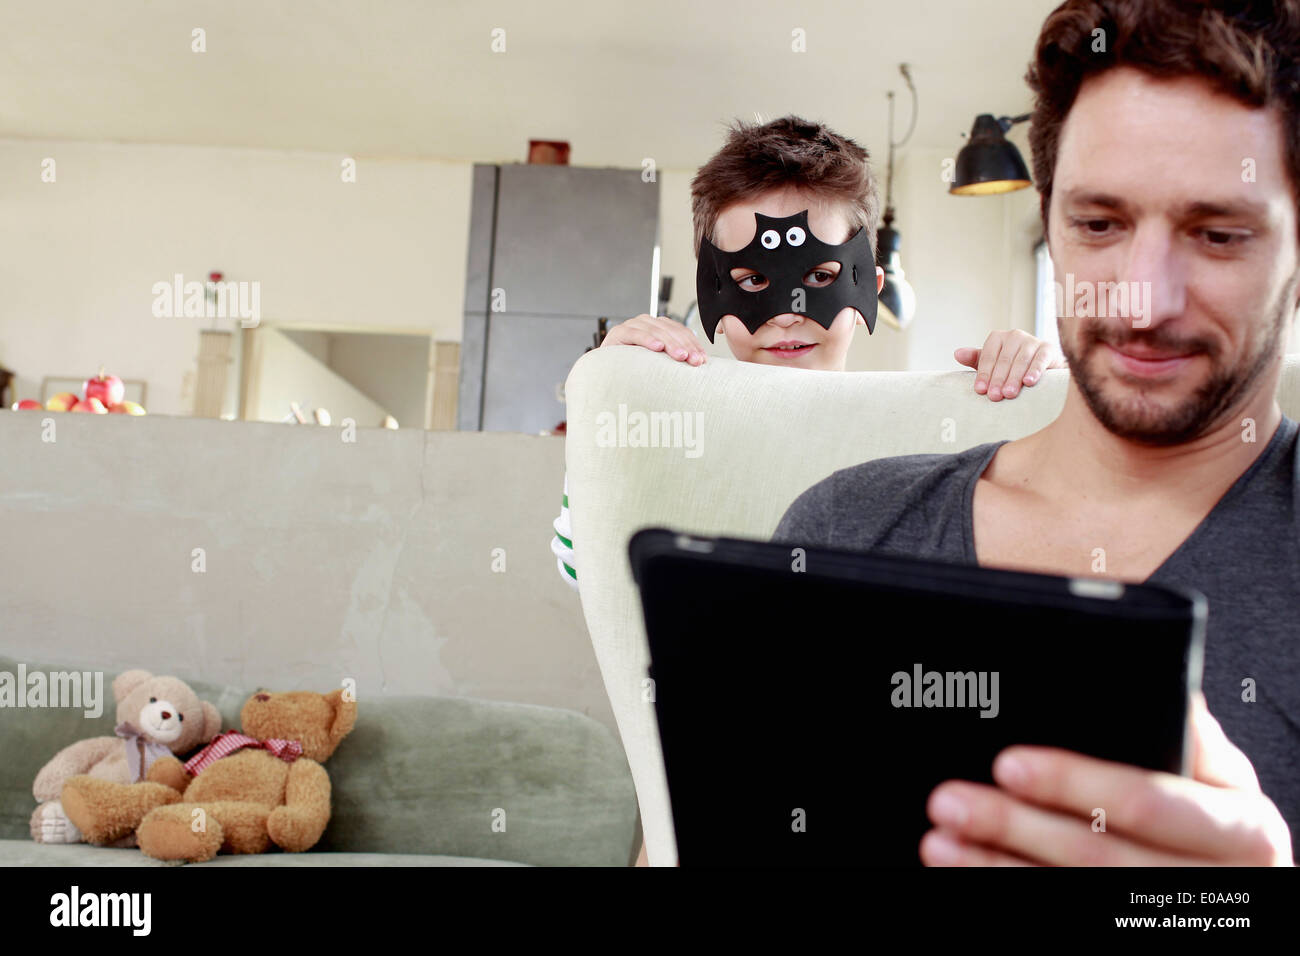 Masked son distracting father from digital tablet Stock Photo